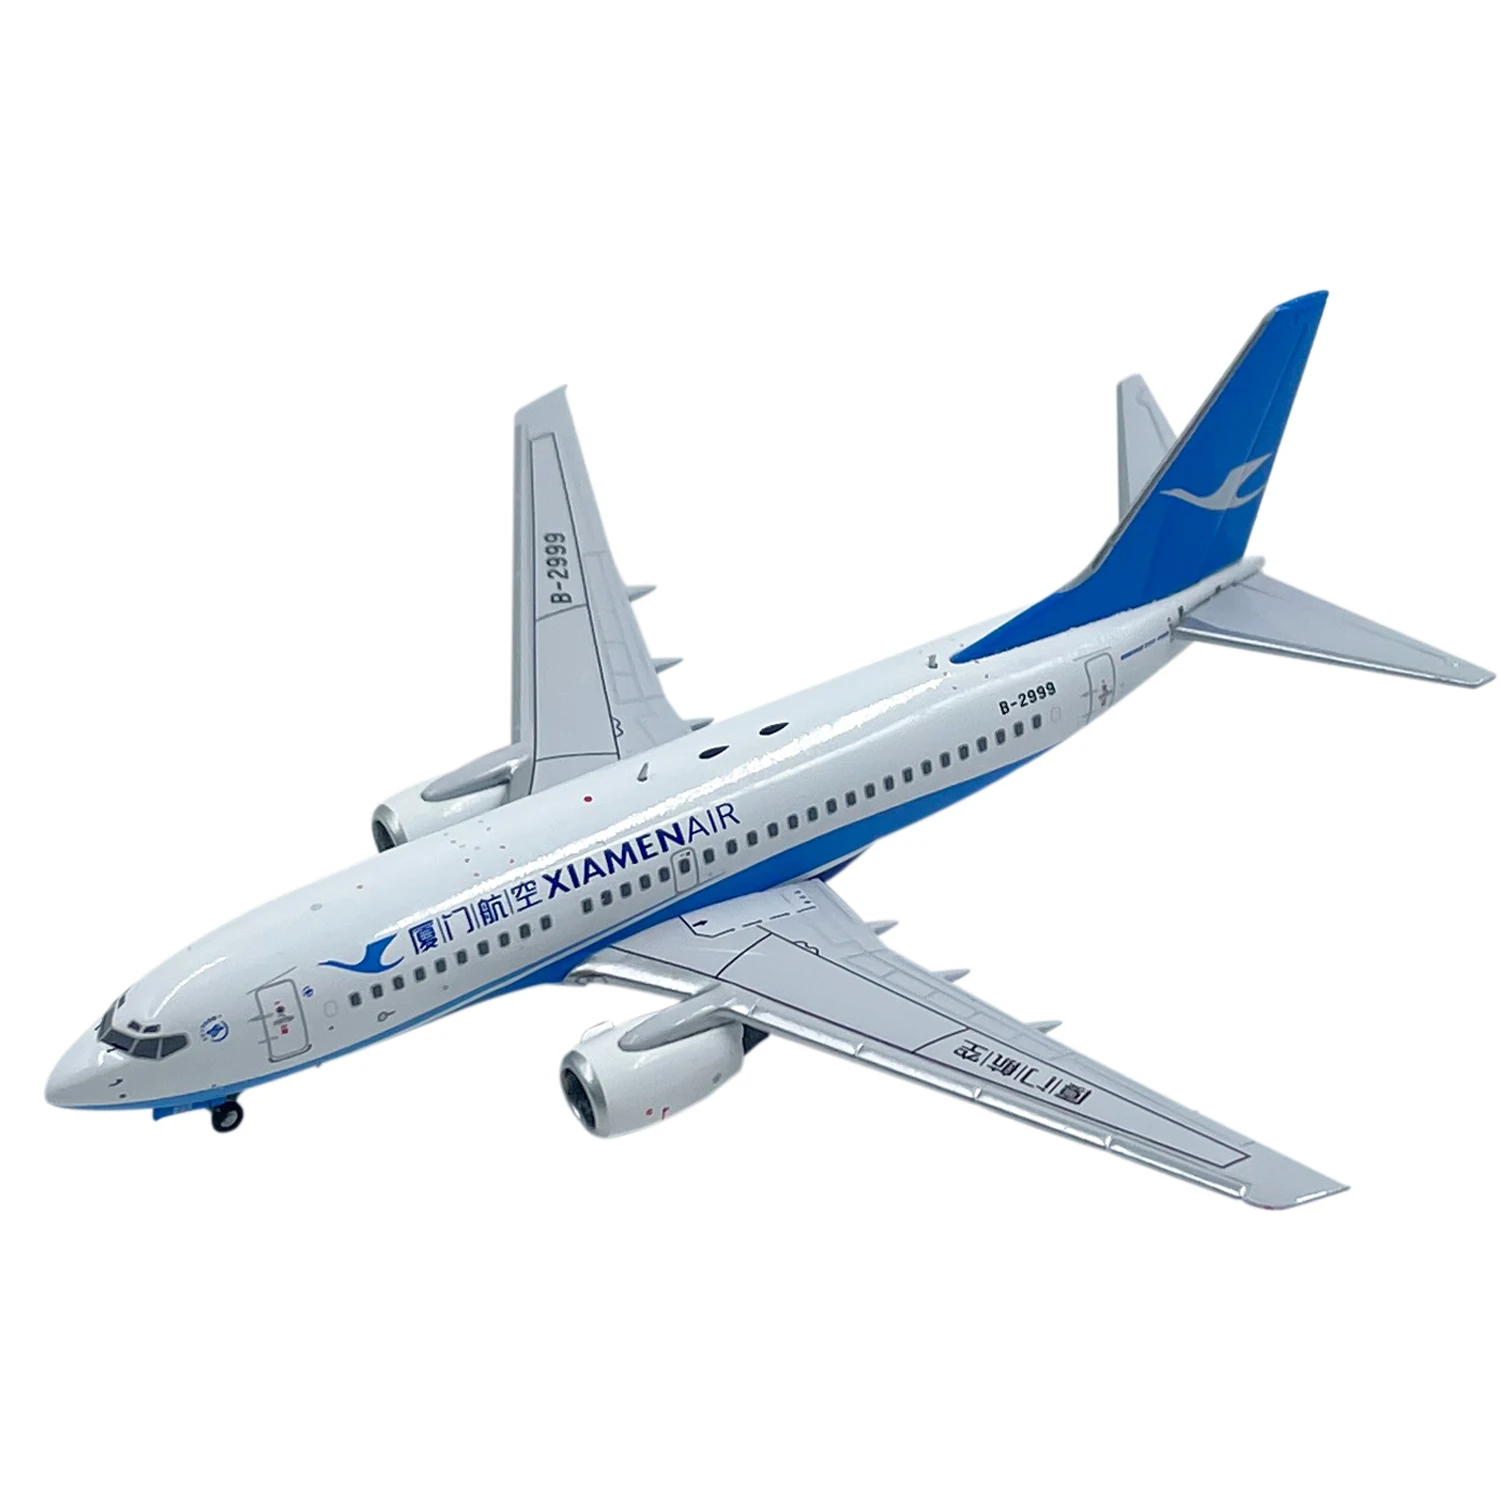 

1:400 Scale Xiamen Airlines Boeing B737-700 Aircraft B-2999 Alloy Die Cast Aircraft Model Simulation Decoration Collection Gift